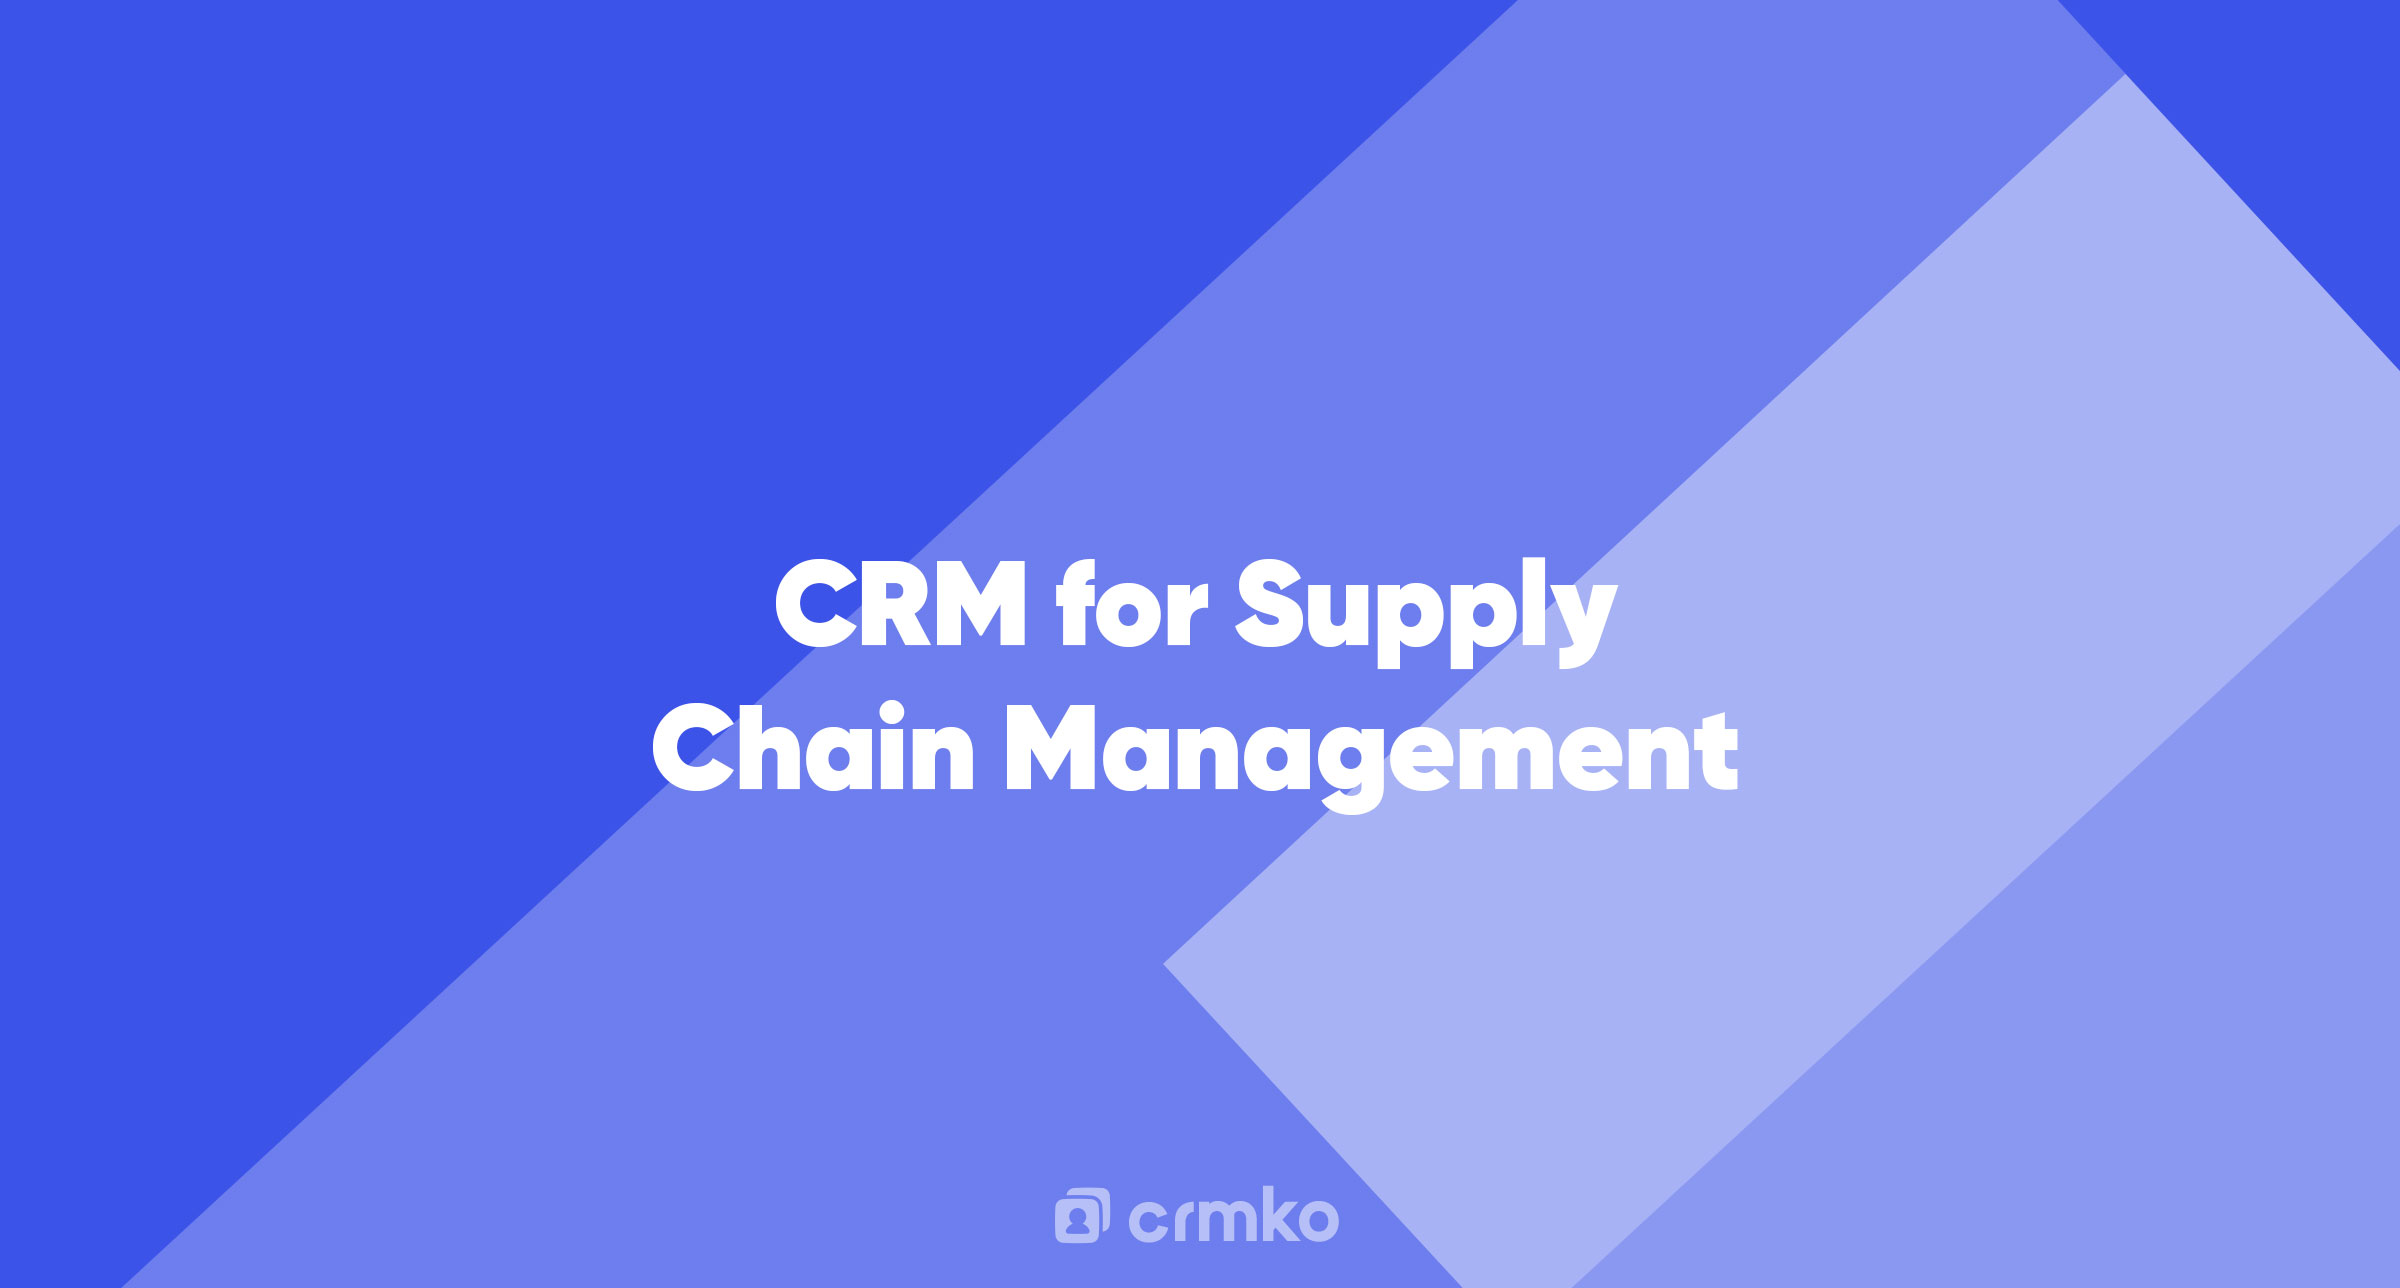 Article | CRM for Supply Chain Management